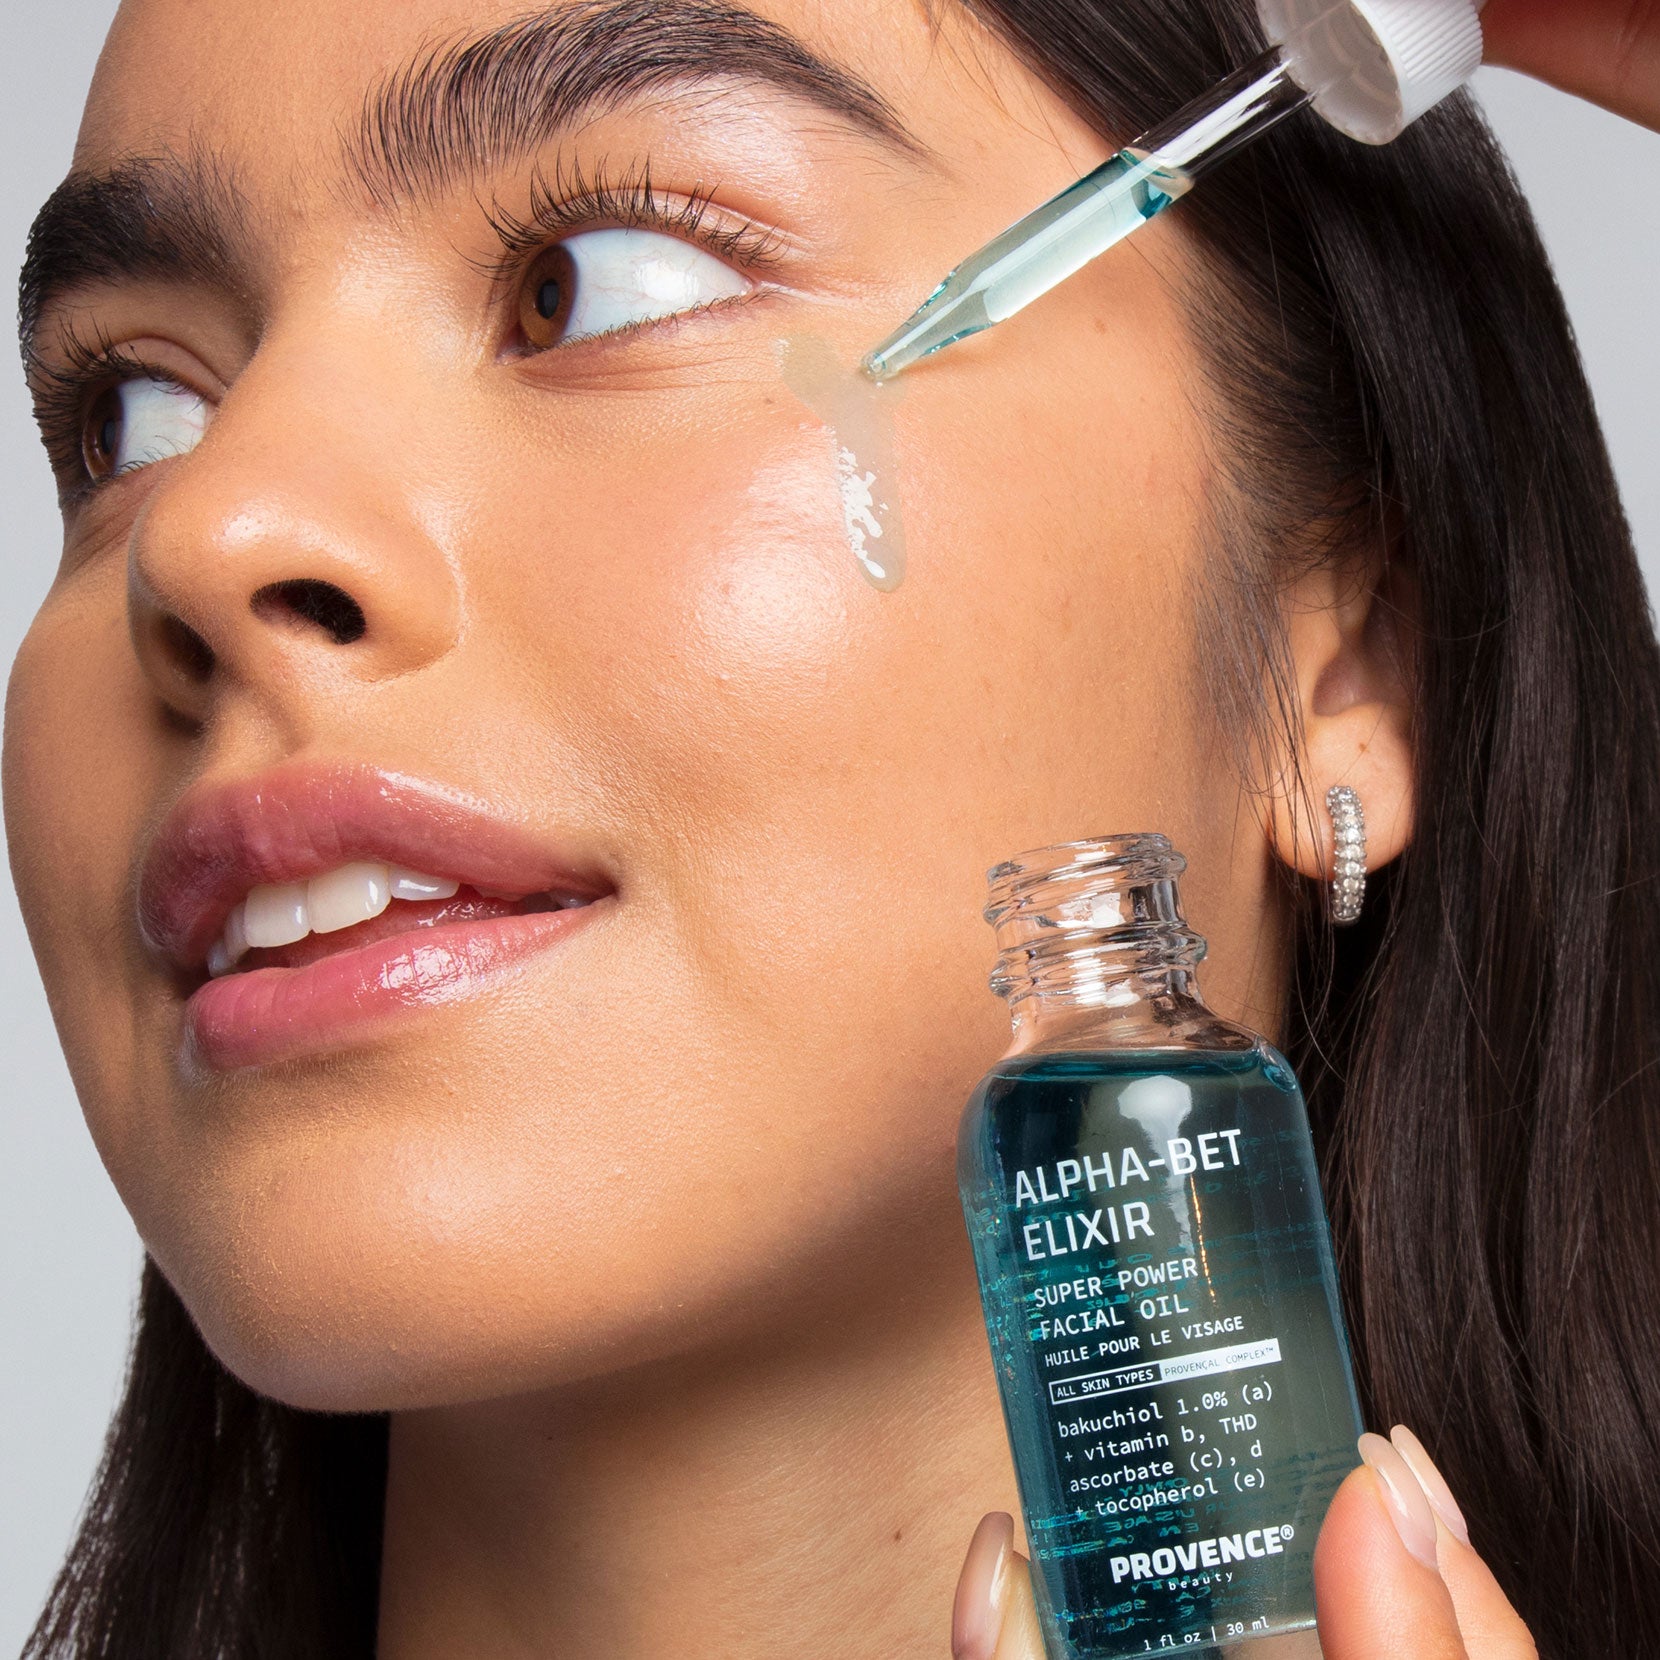 A model with glowing skin and dark brown hair applying Alpha-Bet Elixir Super Power to her cheek. The light blue color contrasts with her complexion.